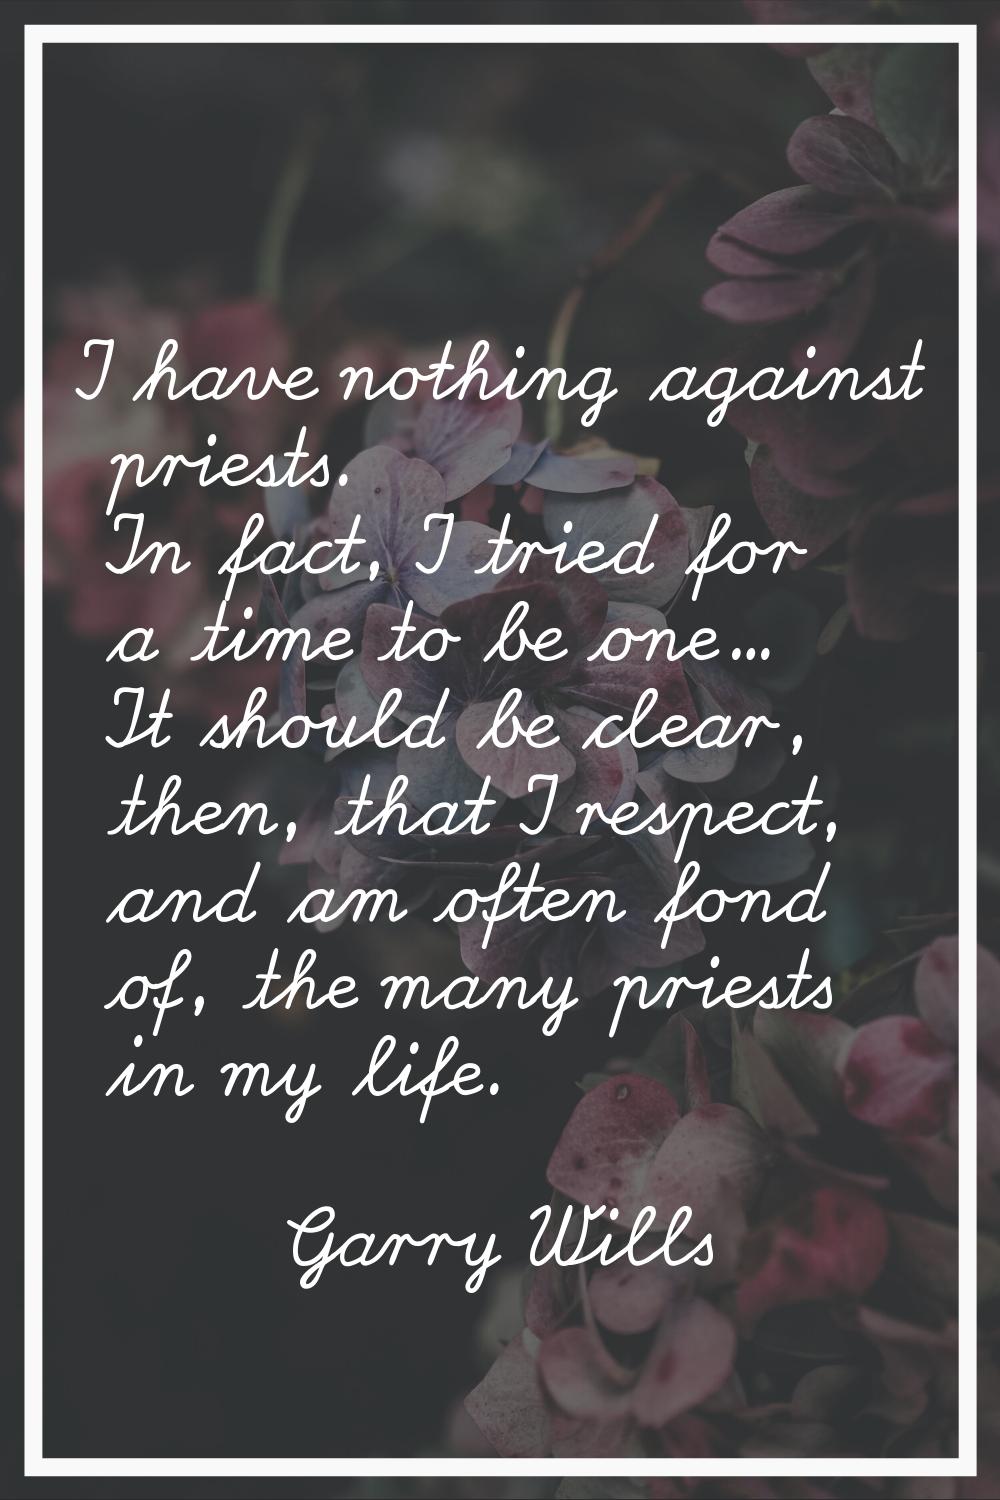 I have nothing against priests. In fact, I tried for a time to be one... It should be clear, then, 